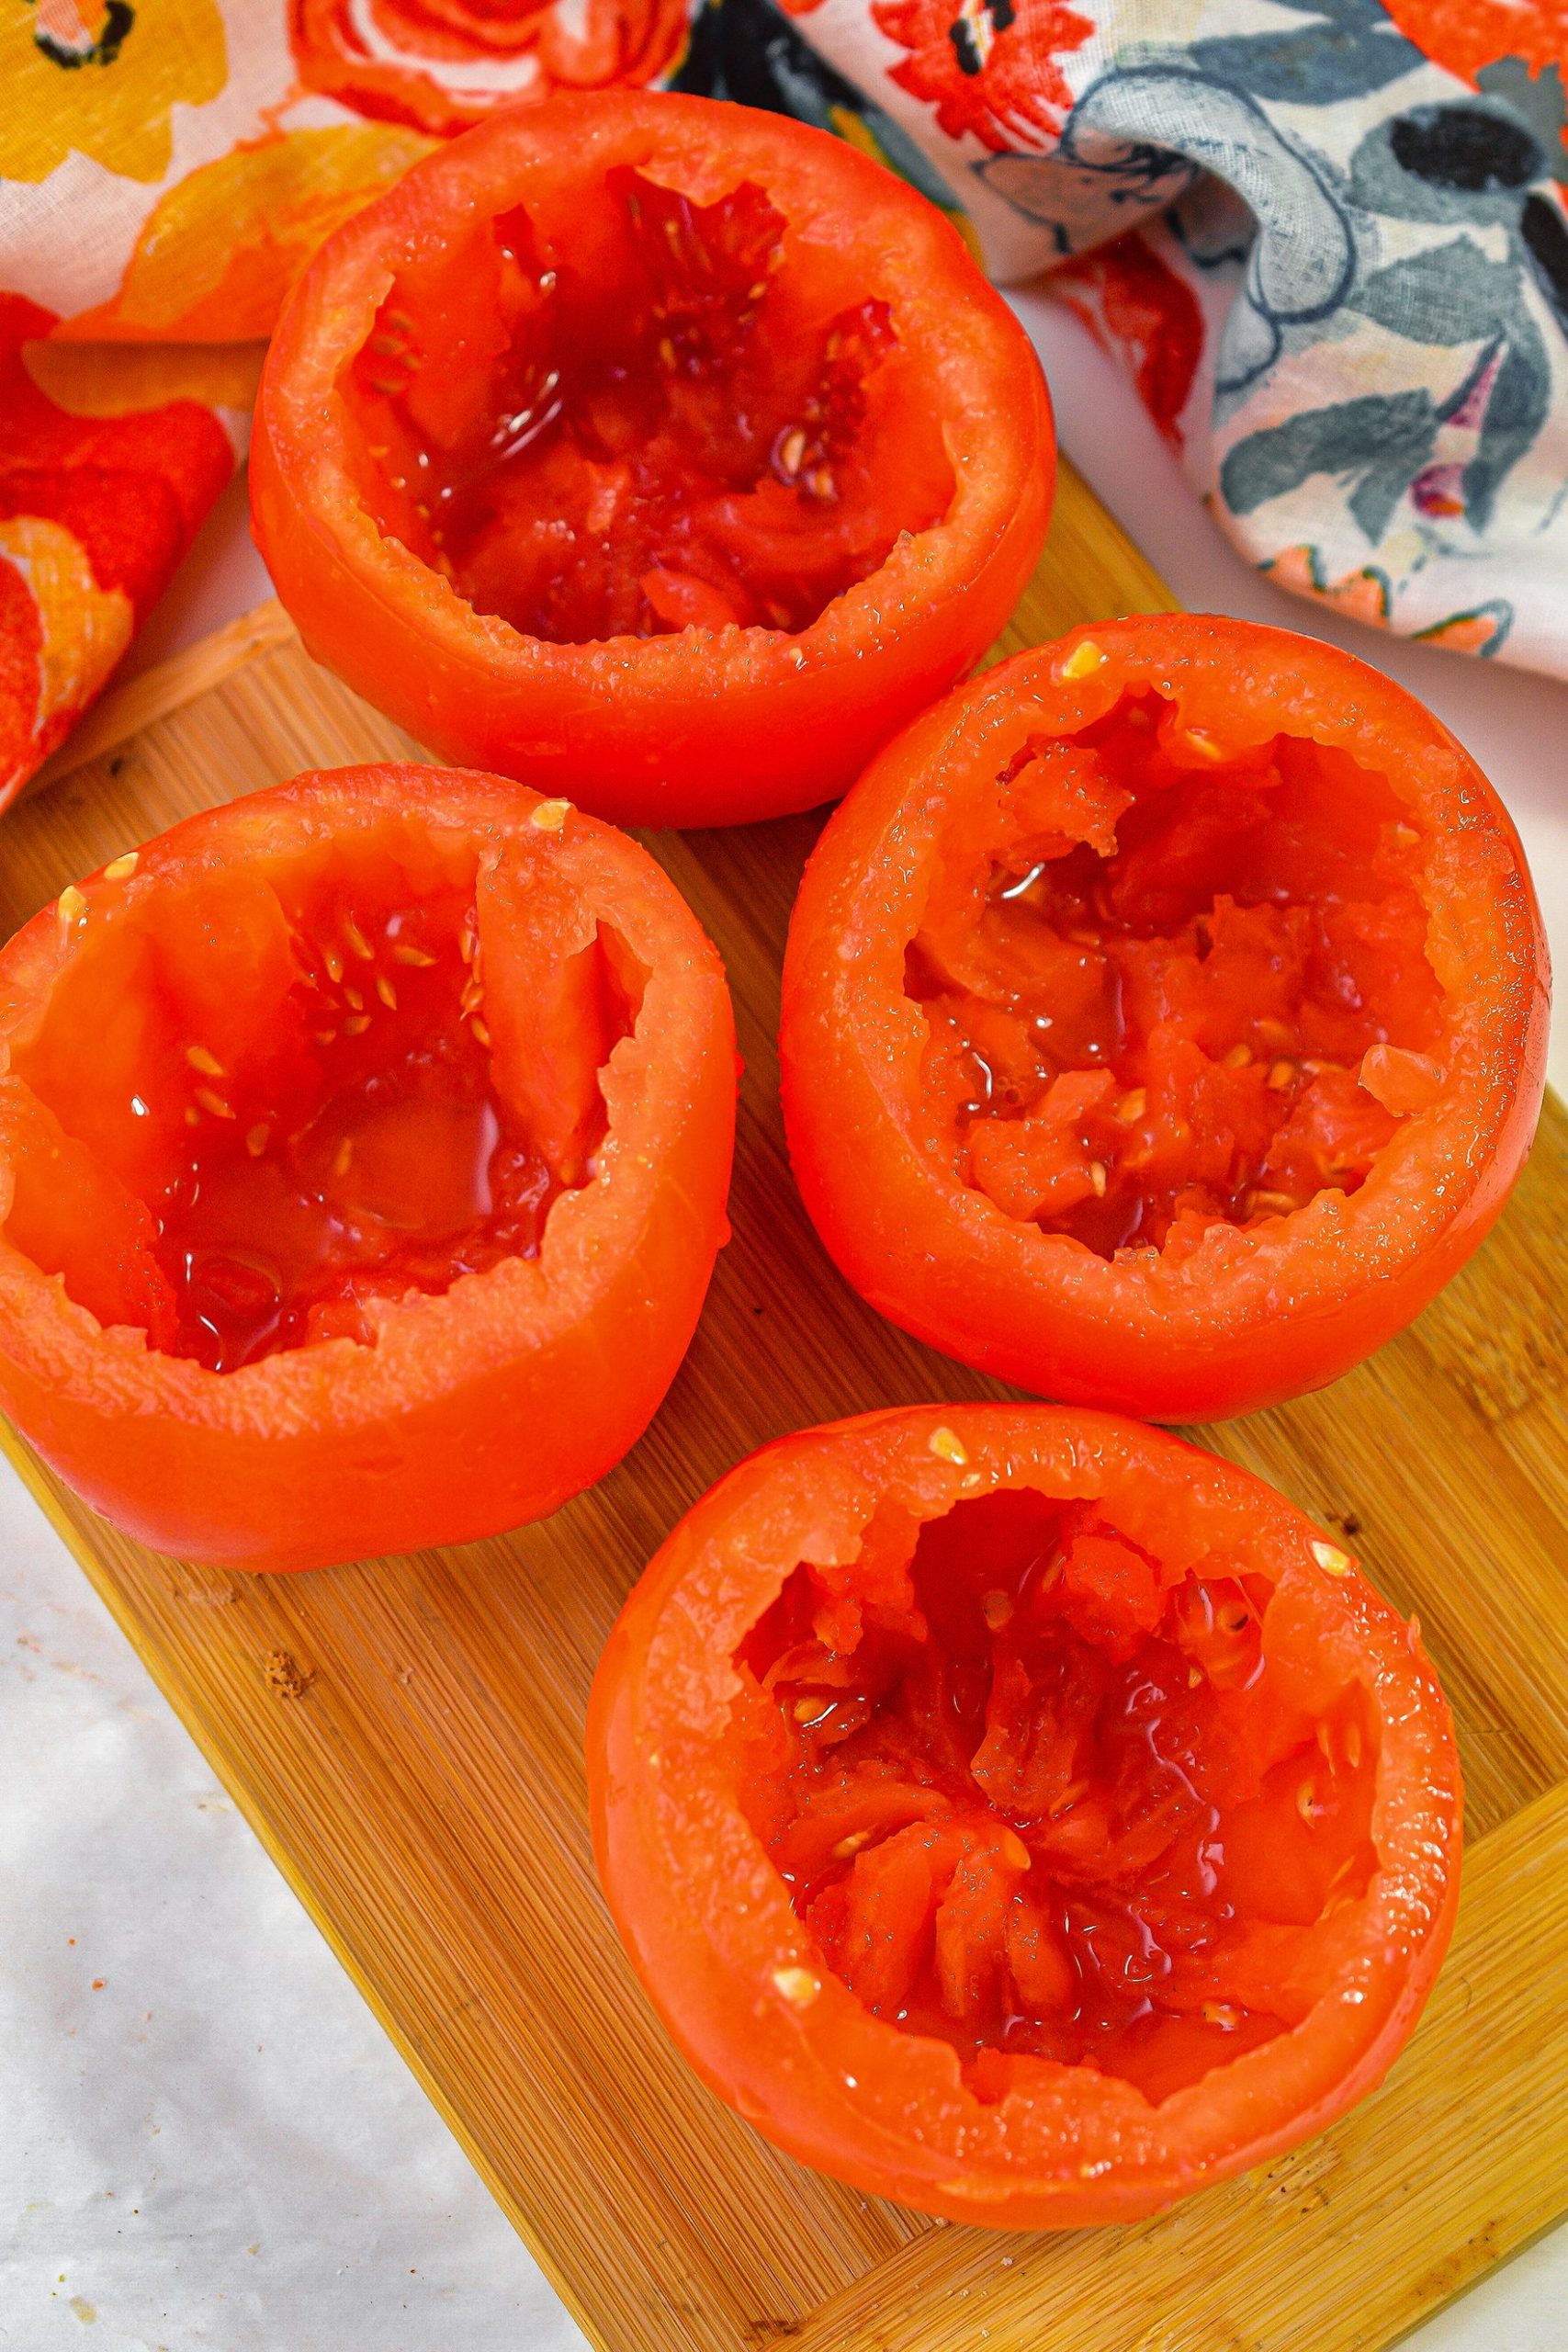 Slice the top of the tomatoes off, remove the center of the tomato and spoon out the inside.